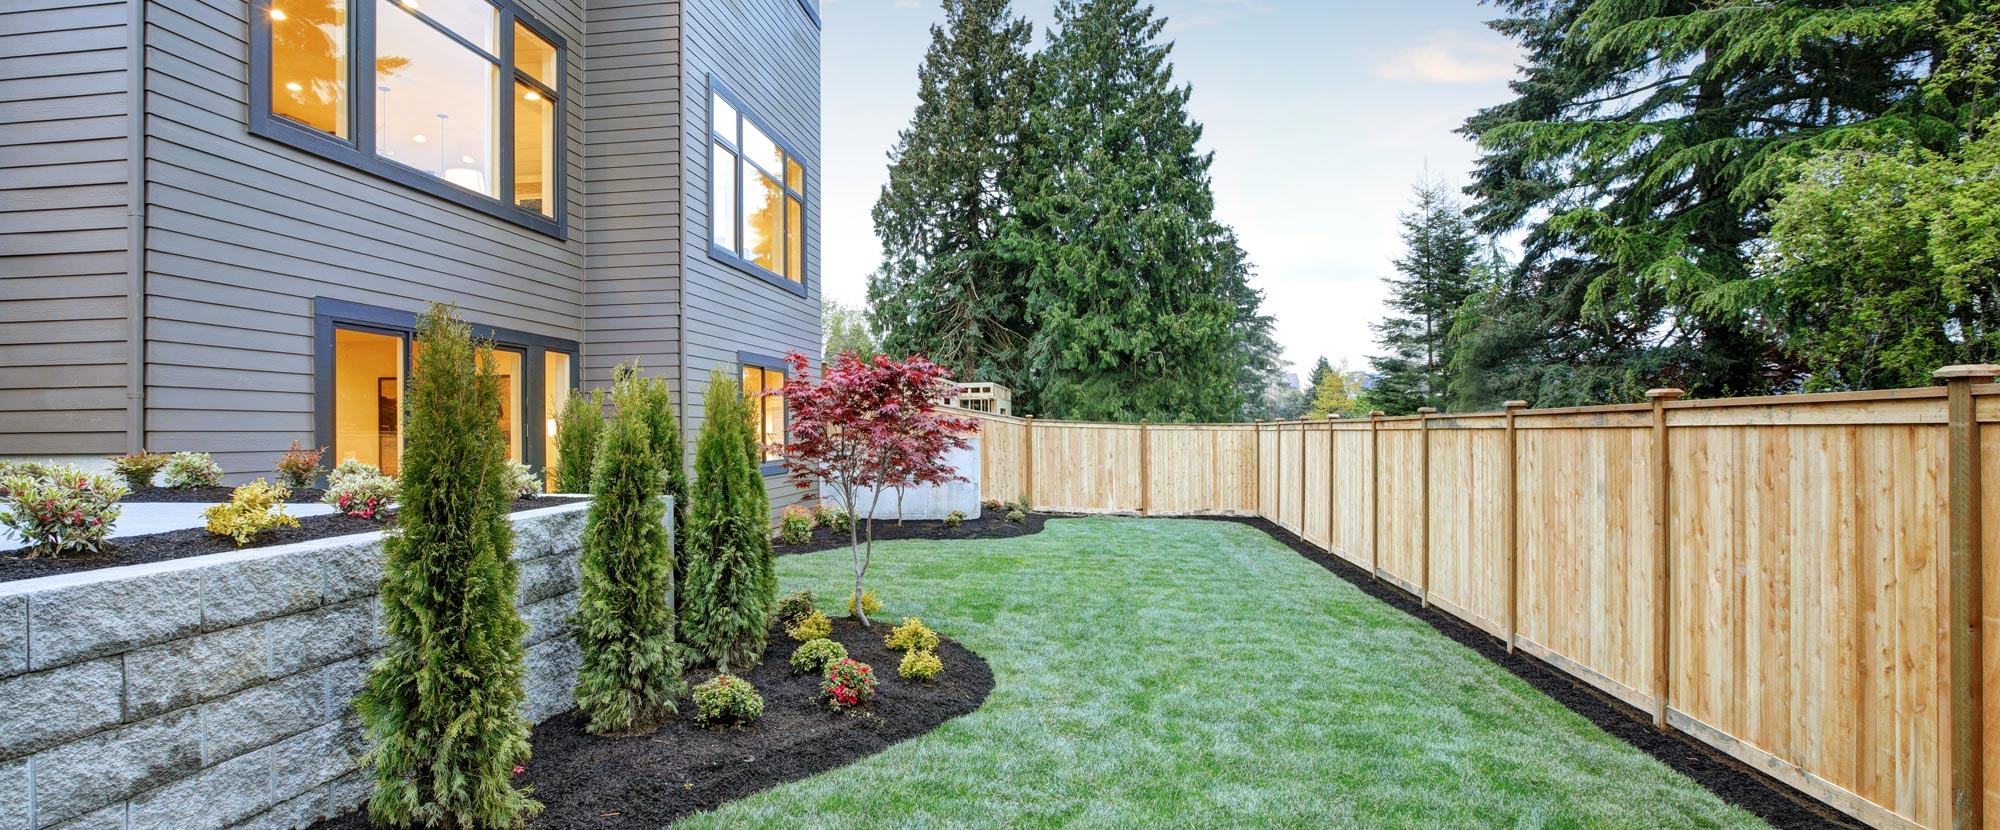 Looking For A Fencing Contractor?